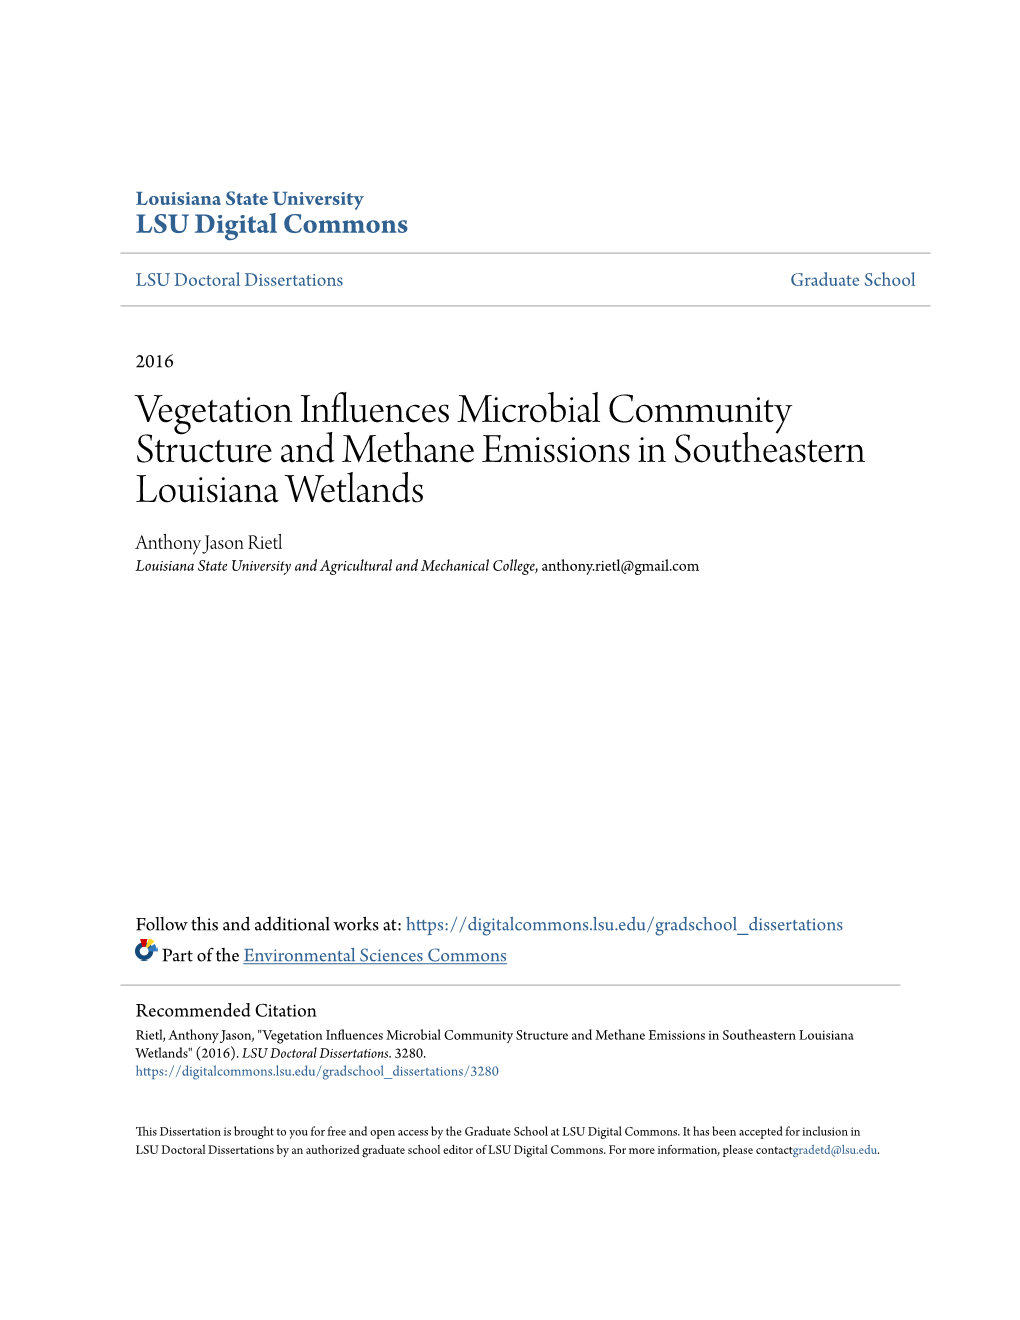 Vegetation Influences Microbial Community Structure and Methane Emissions in Southeastern Louisiana Wetlands